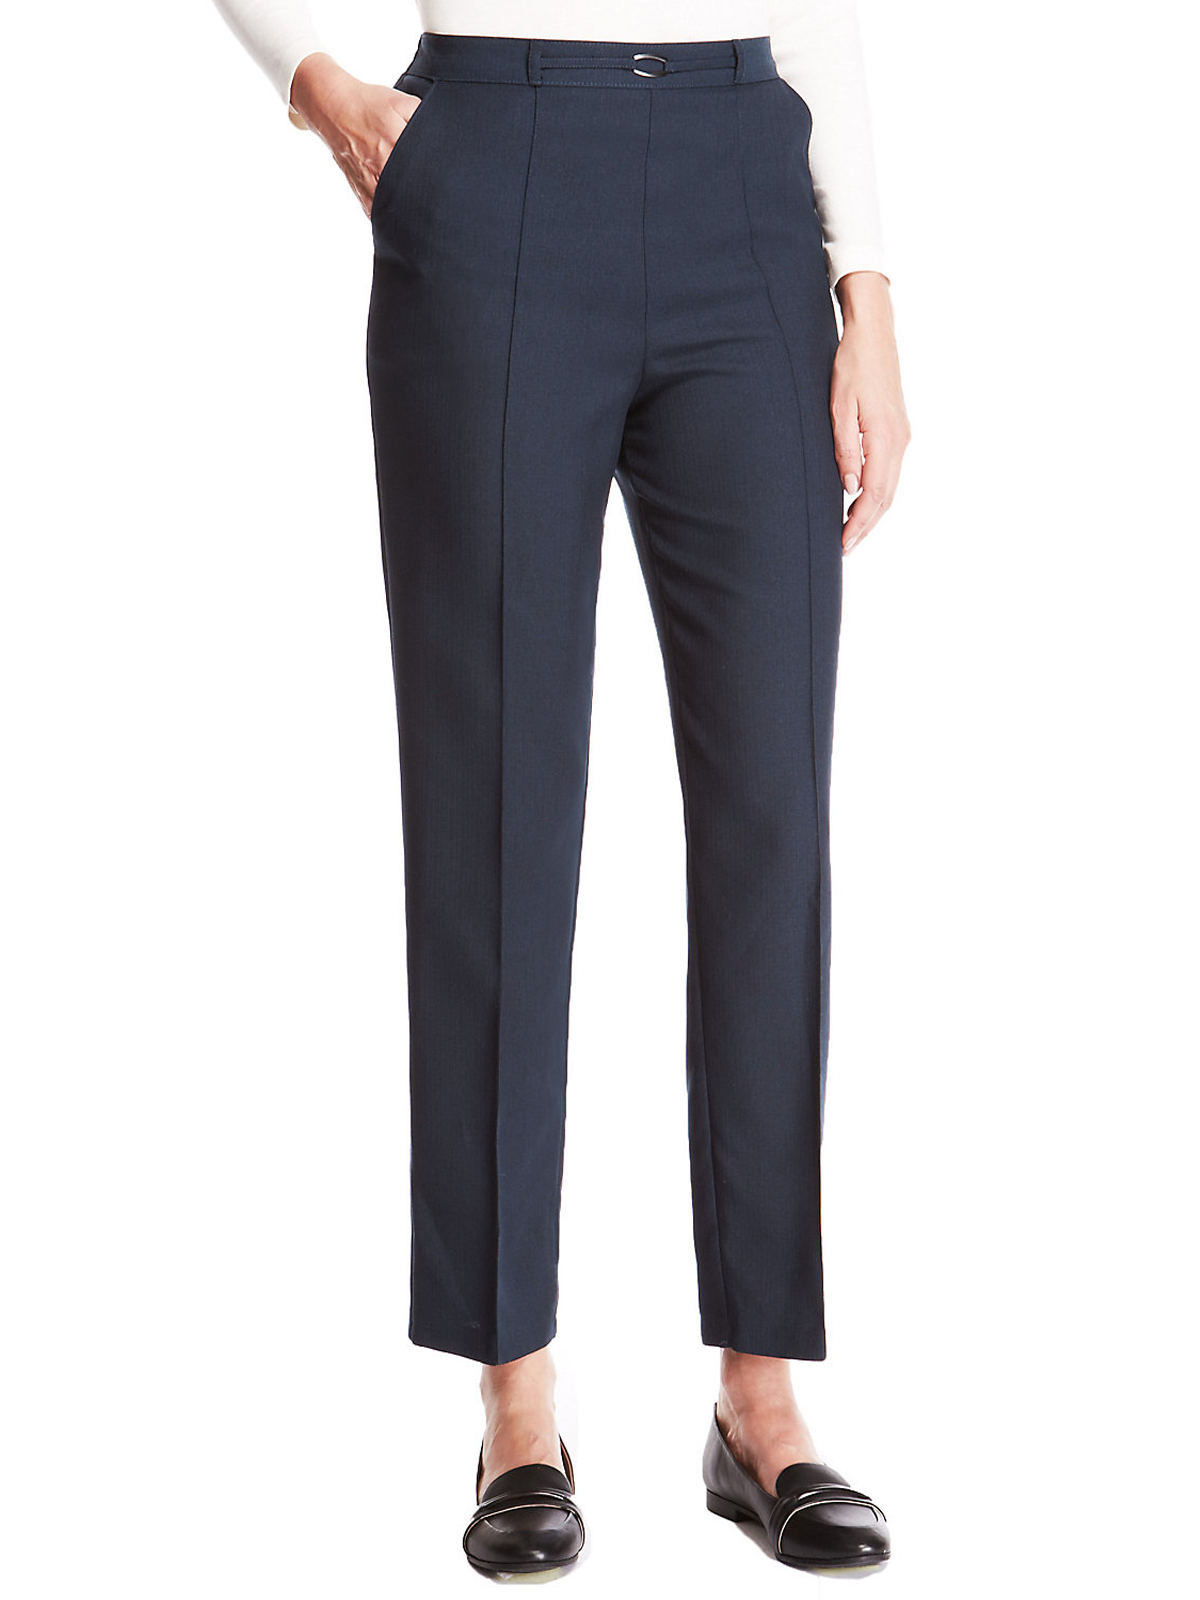 Marks and Spencer - - M&5 NAVY Pull On Trousers - Size 8 to 24